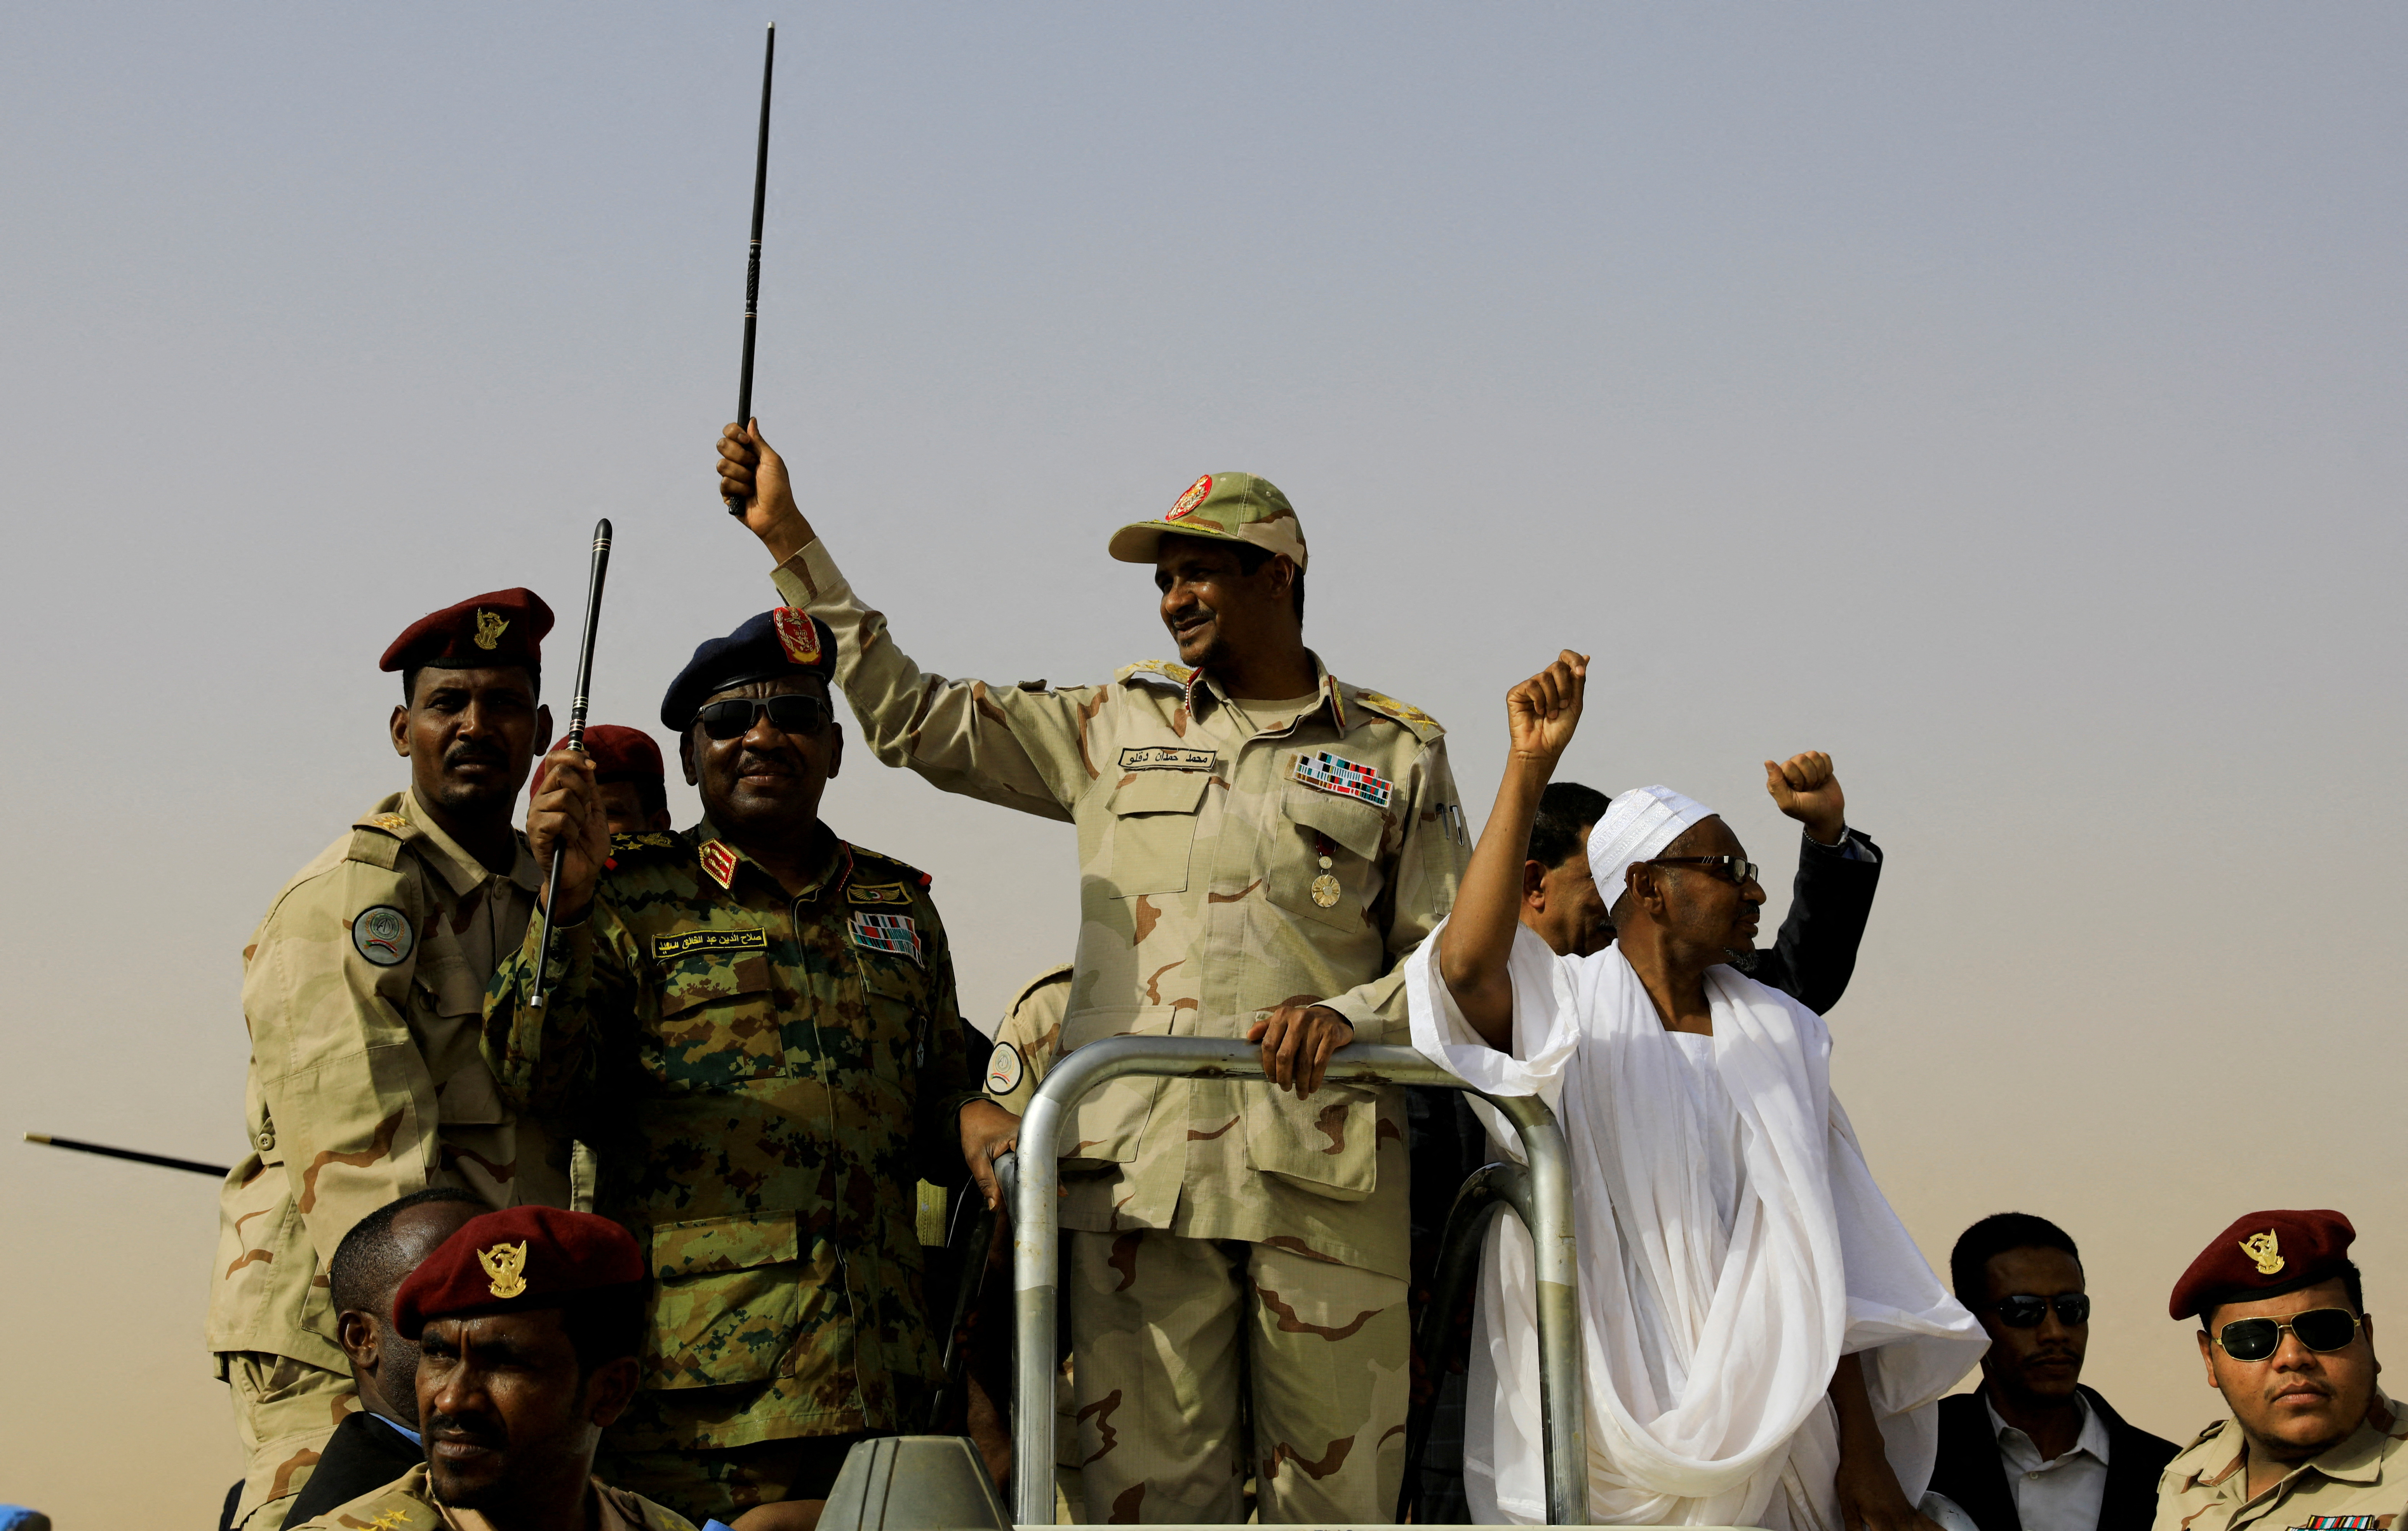 image Sudan paramilitary RSF to attend Jeddah talks with armed forces